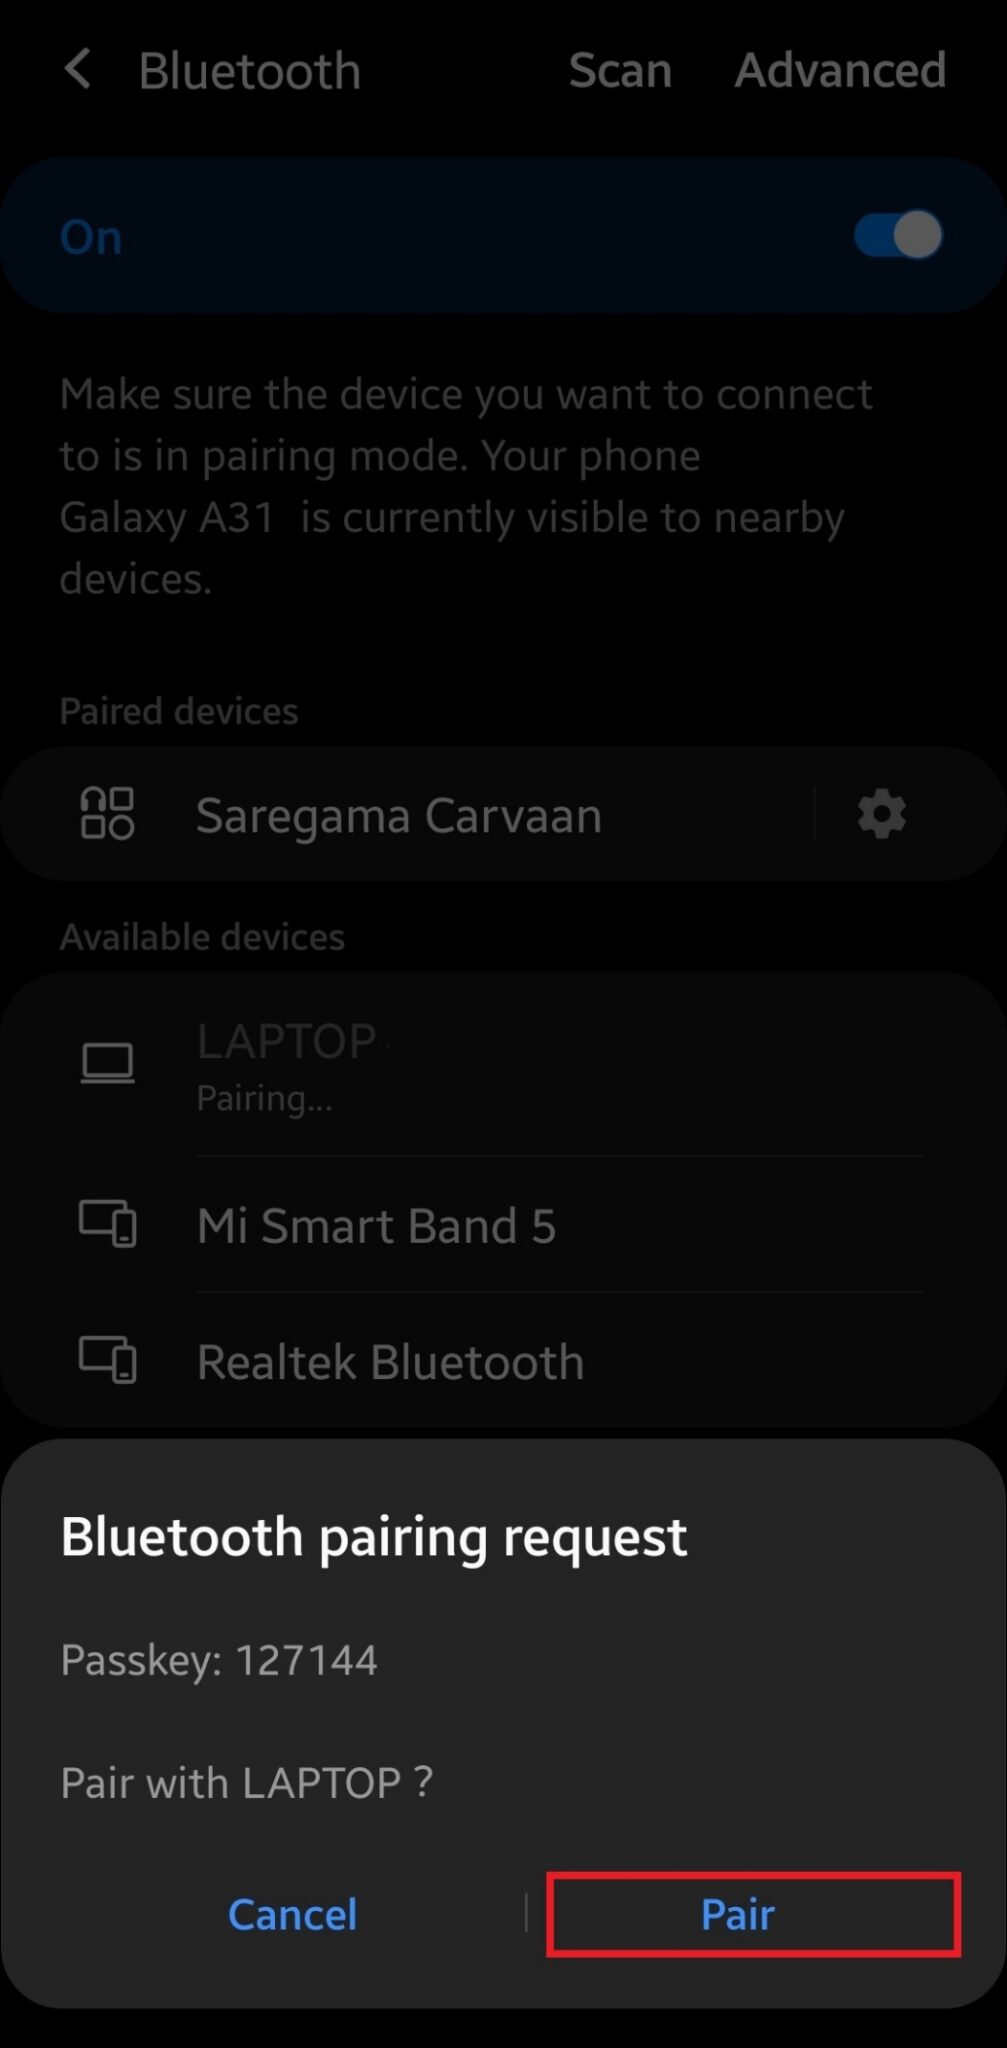 Now it will ask for Bluetooth pairing request. Tap on Pair | How To Change Bluetooth Device Name in Windows 10